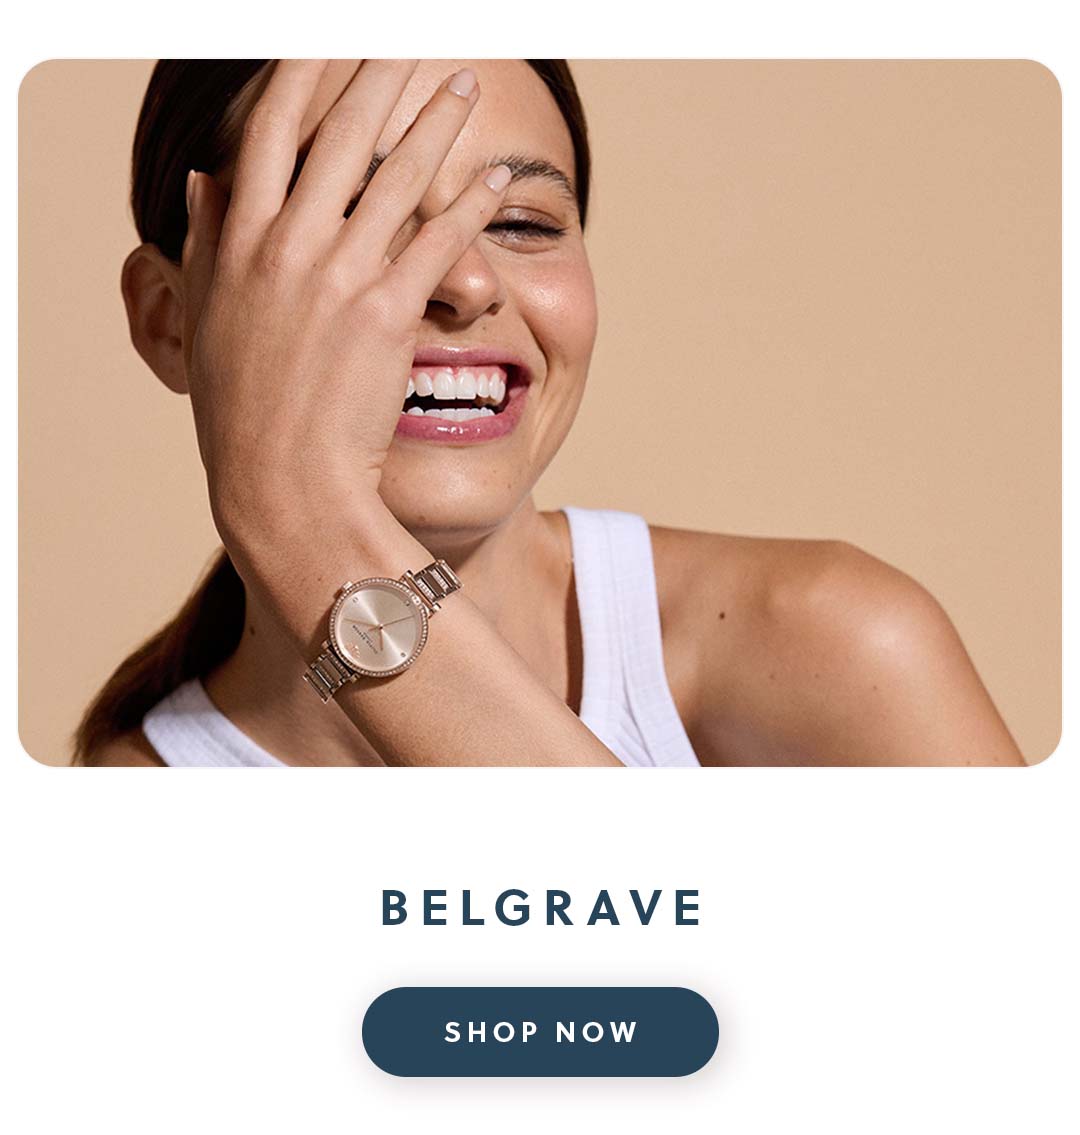 An Olivia Burton watch worn by woman with text belgrave shop now